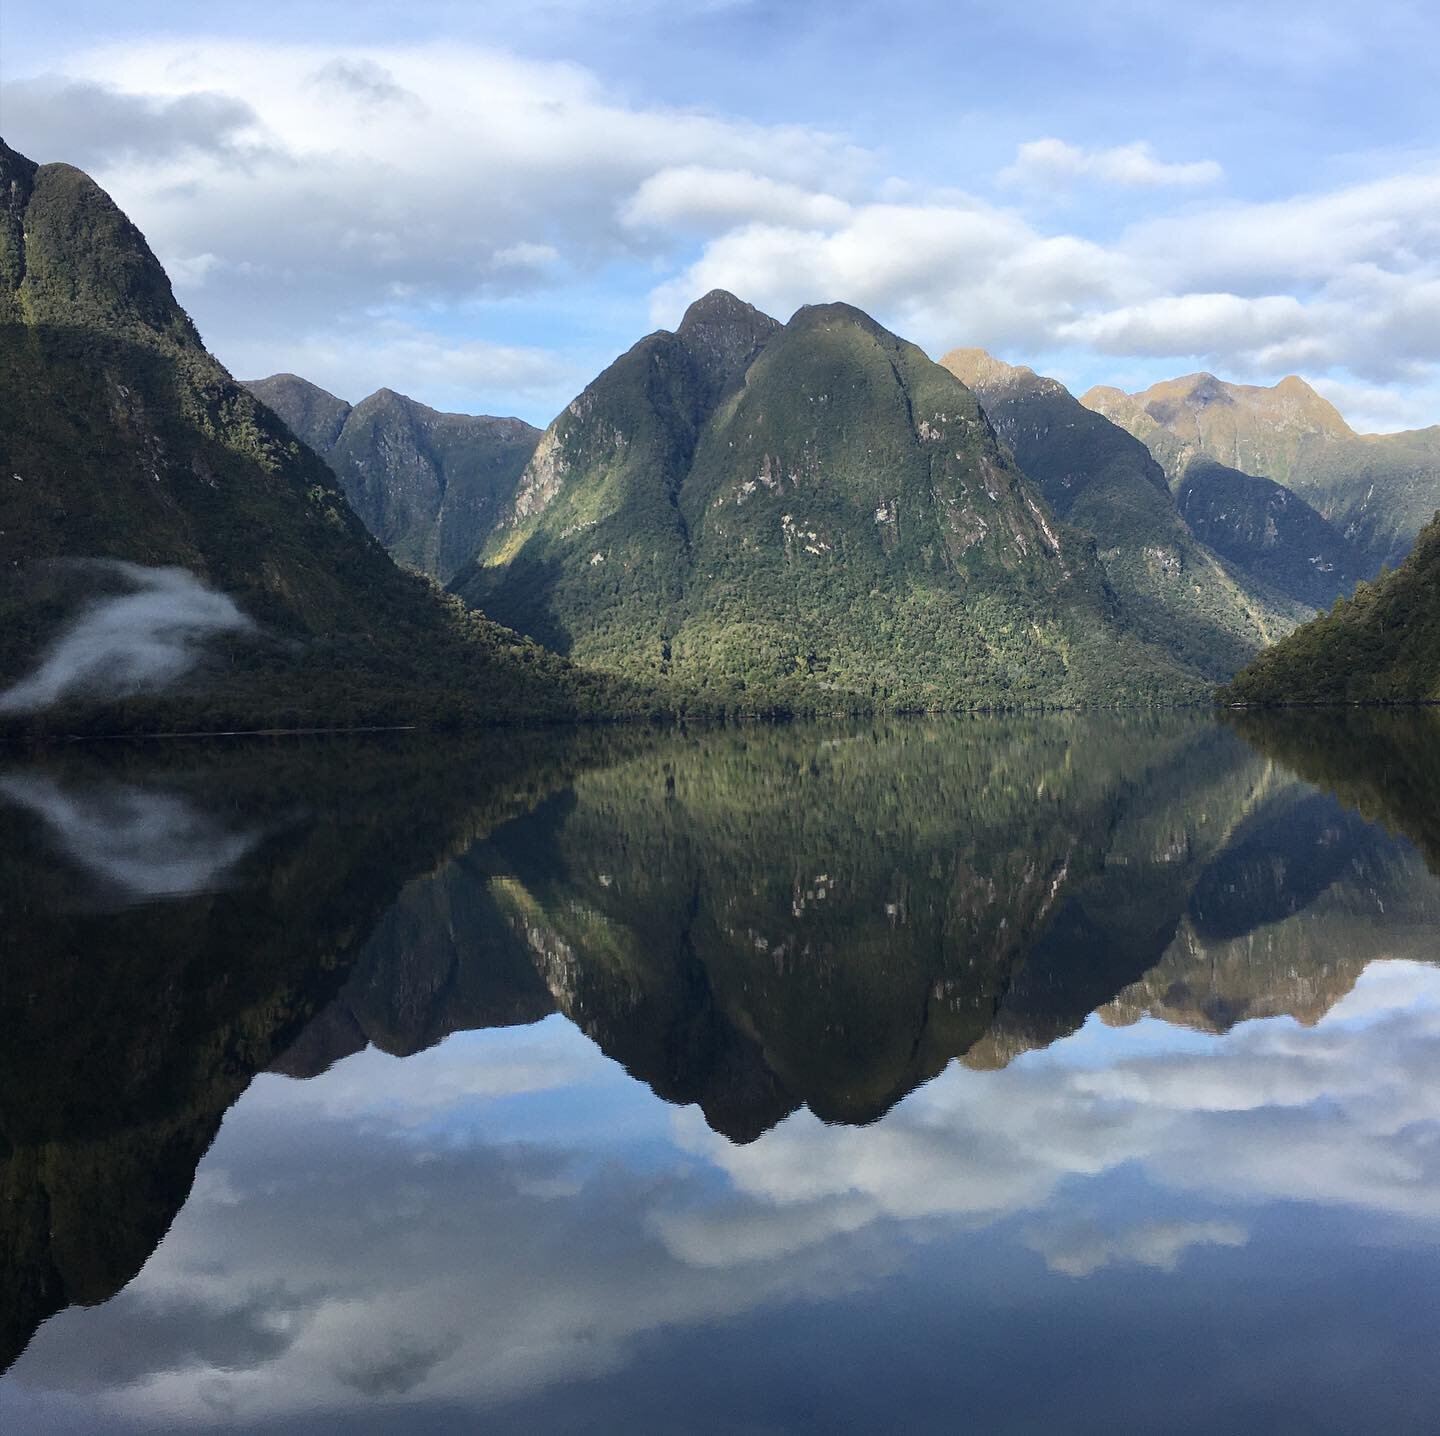 Limited spaces available for our Doubtful Sound overnight cruise on the 18th July. Give us a call on 0508 888 656 for more details or to make a booking. #doubtfulsound #fiordland #overnight #teanau #manapouri #nztravel #crayfish #mybackyard